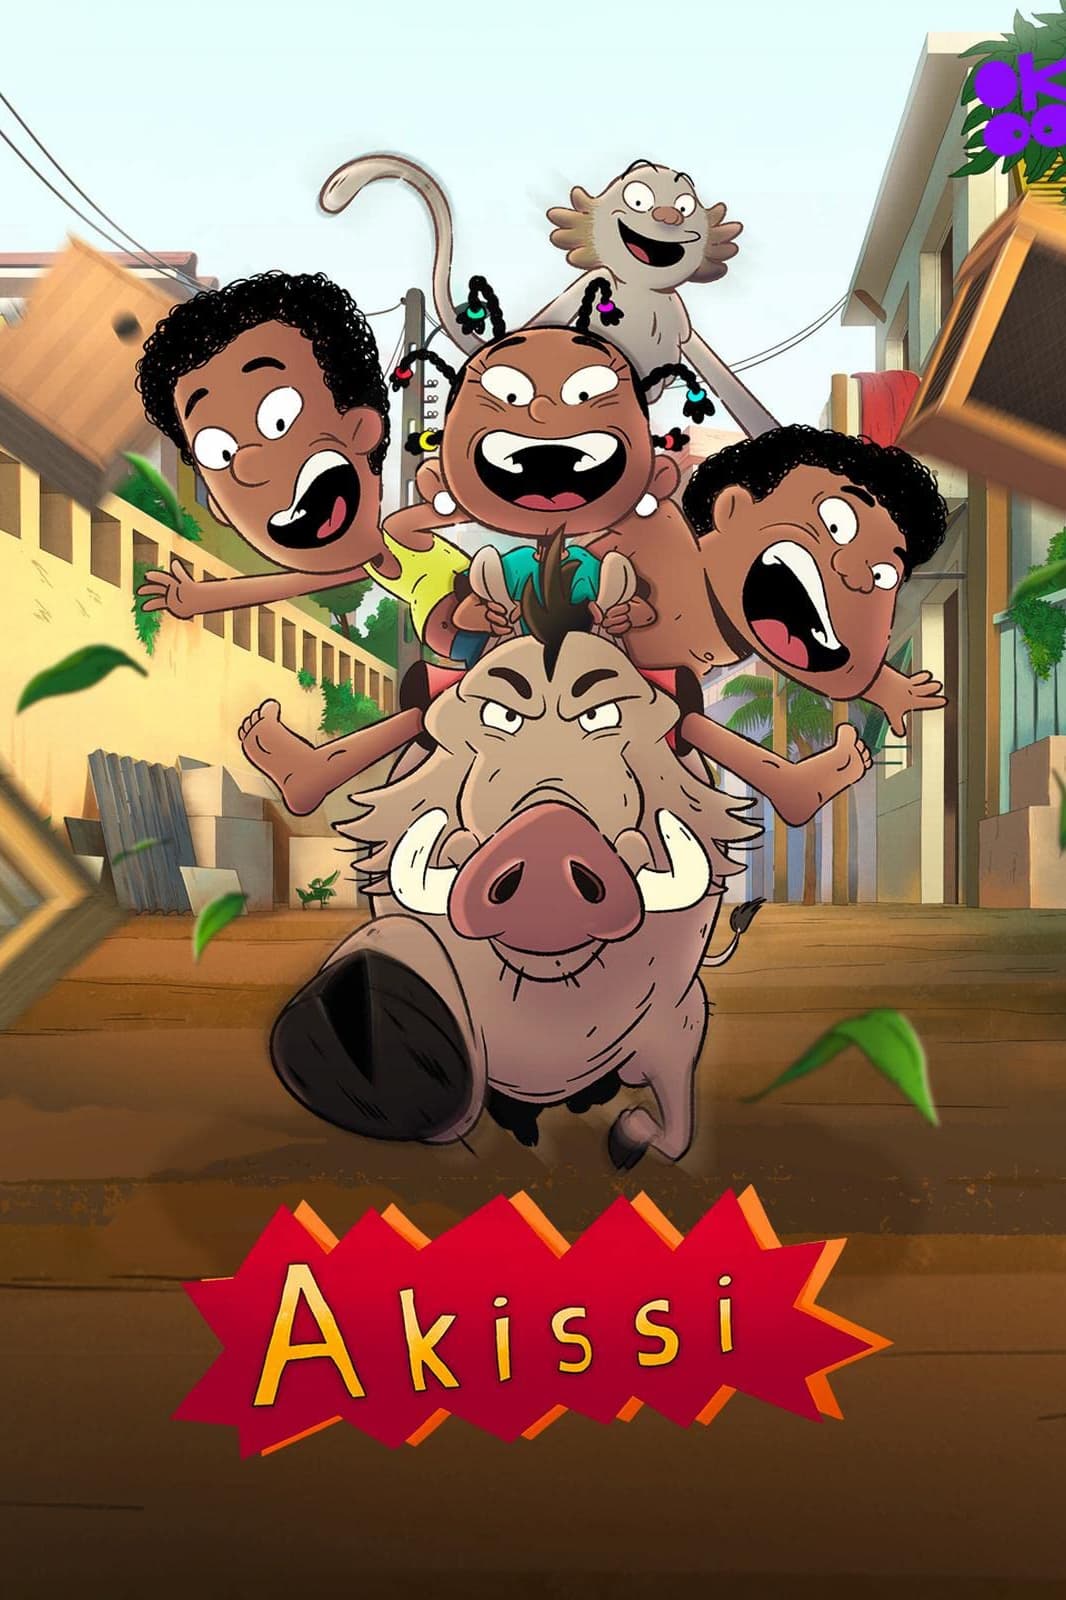 Akissi: A Funny Little Brother